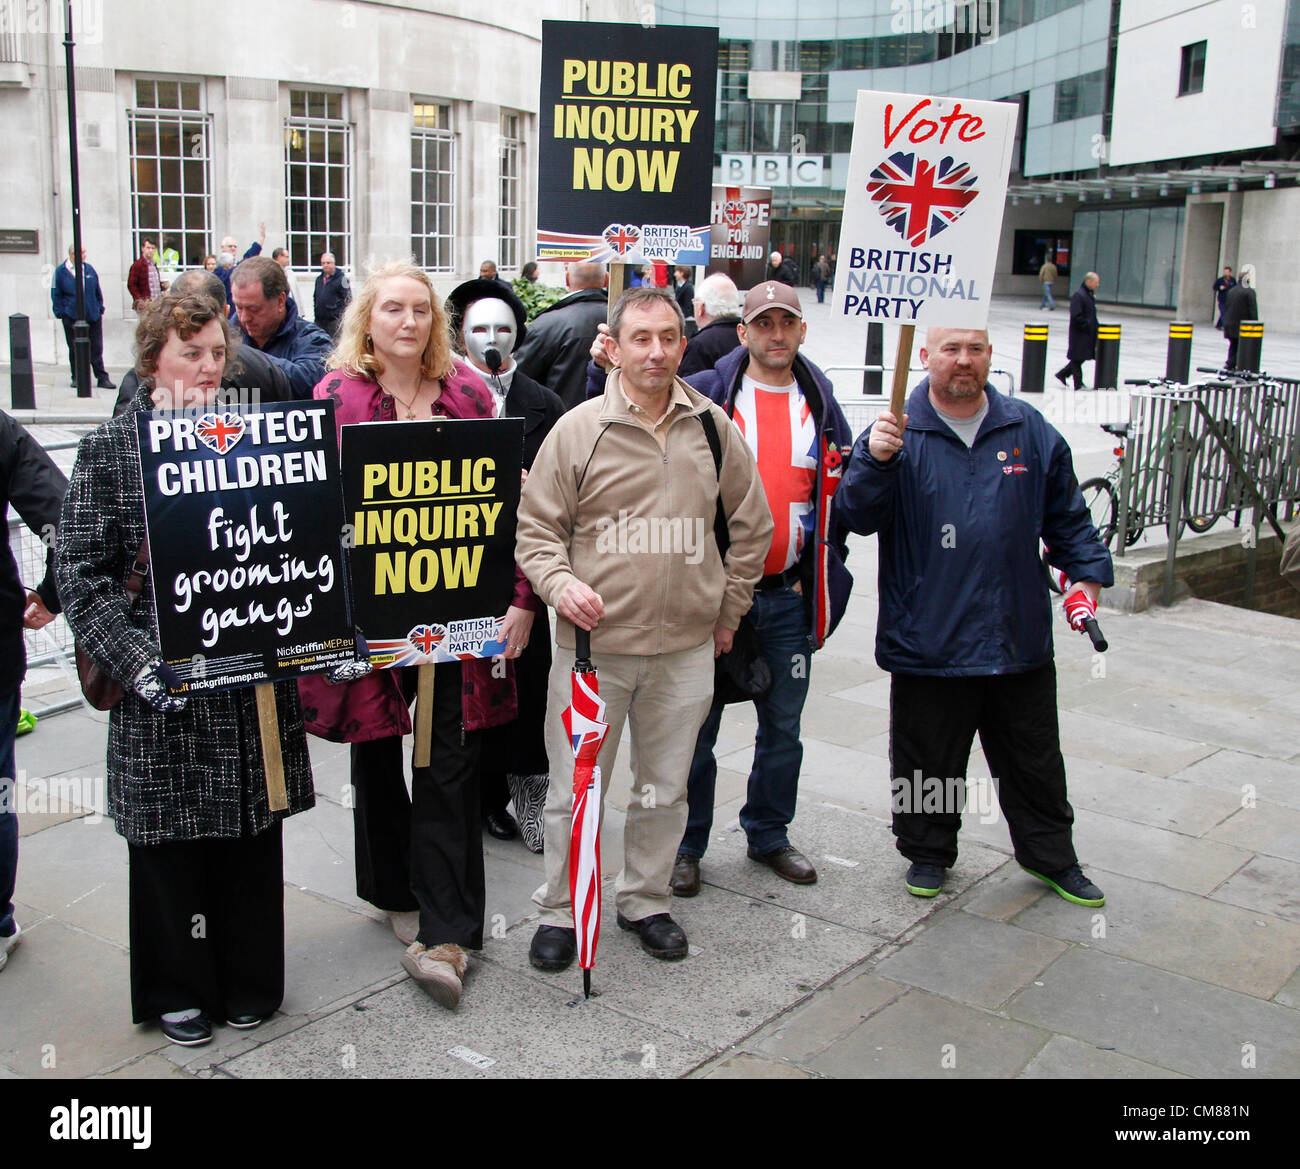 London, UK, 26/10/12: British National Party protesters outside BBC Broadcasting House, Portland Place. Stock Photo